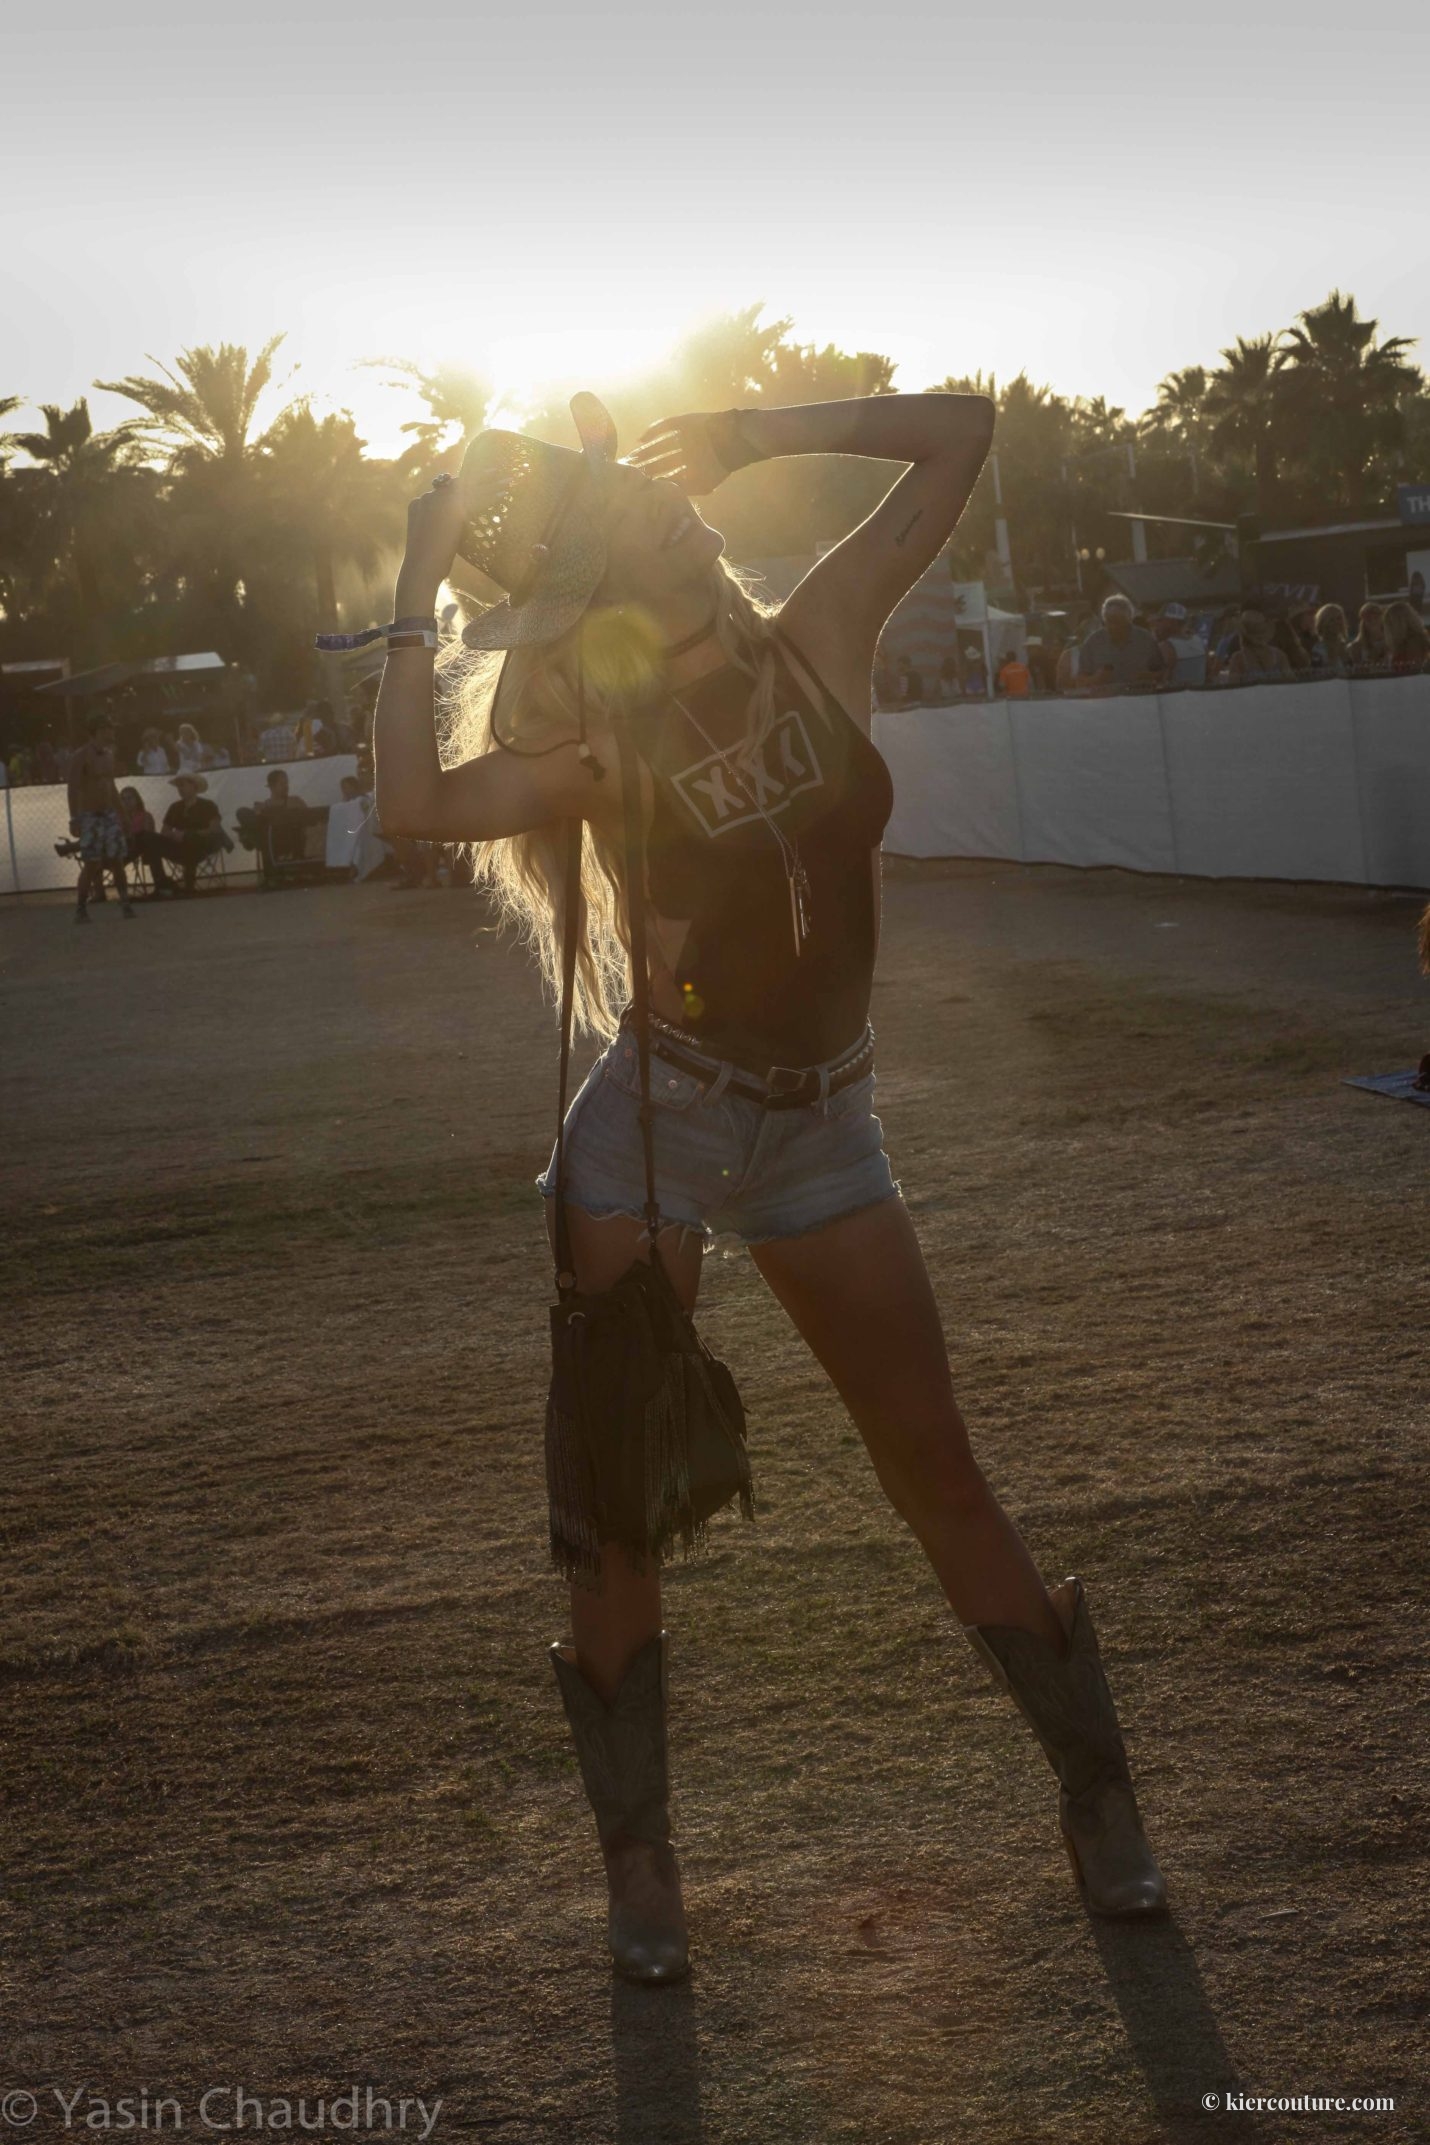 festival fashion at Stagecoach country